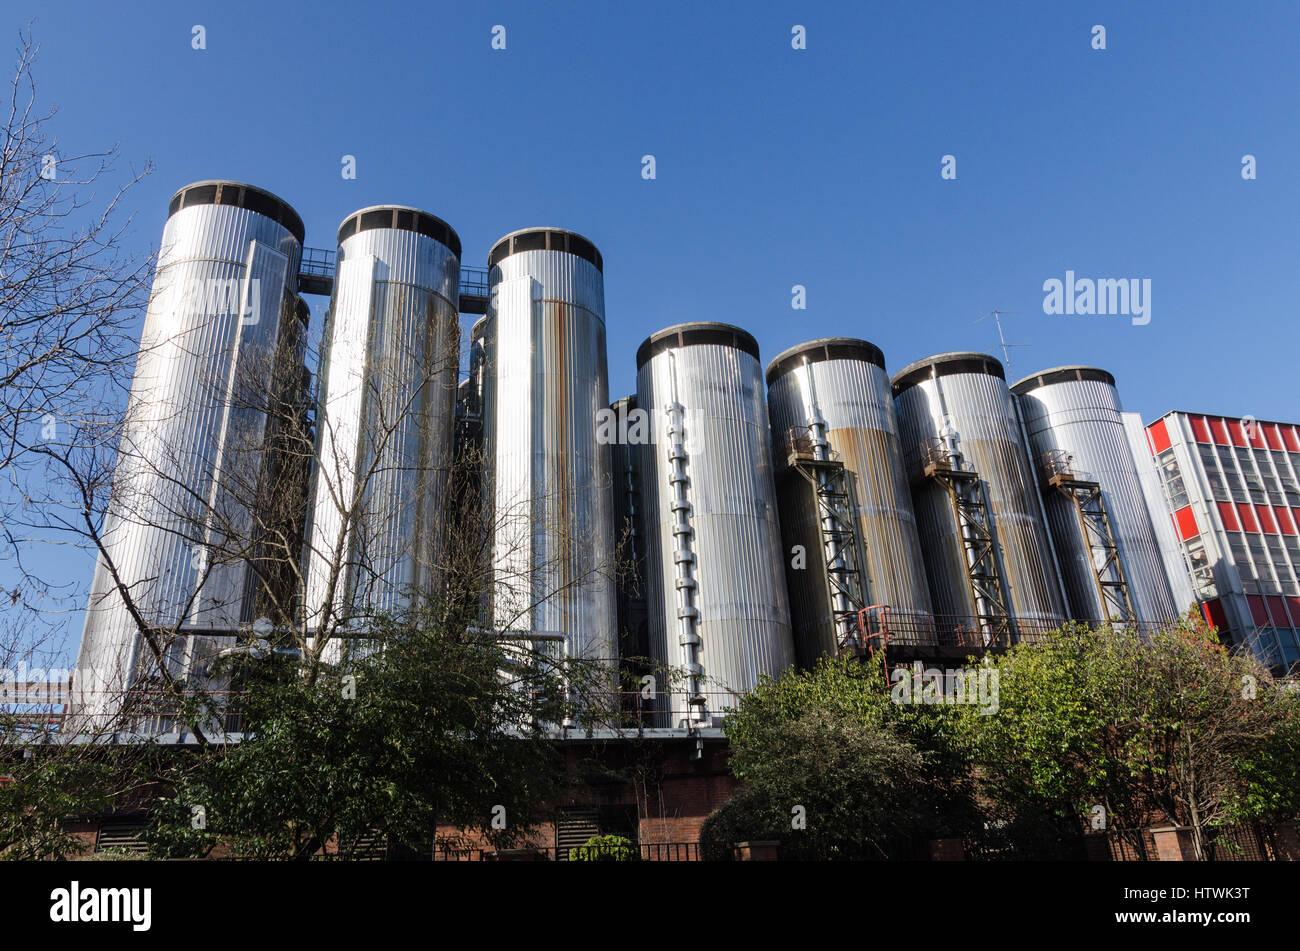 Stainless steel storage tanks at the Molson Coors brewery in Burton-upon-Trent, Staffordshire Stock Photo